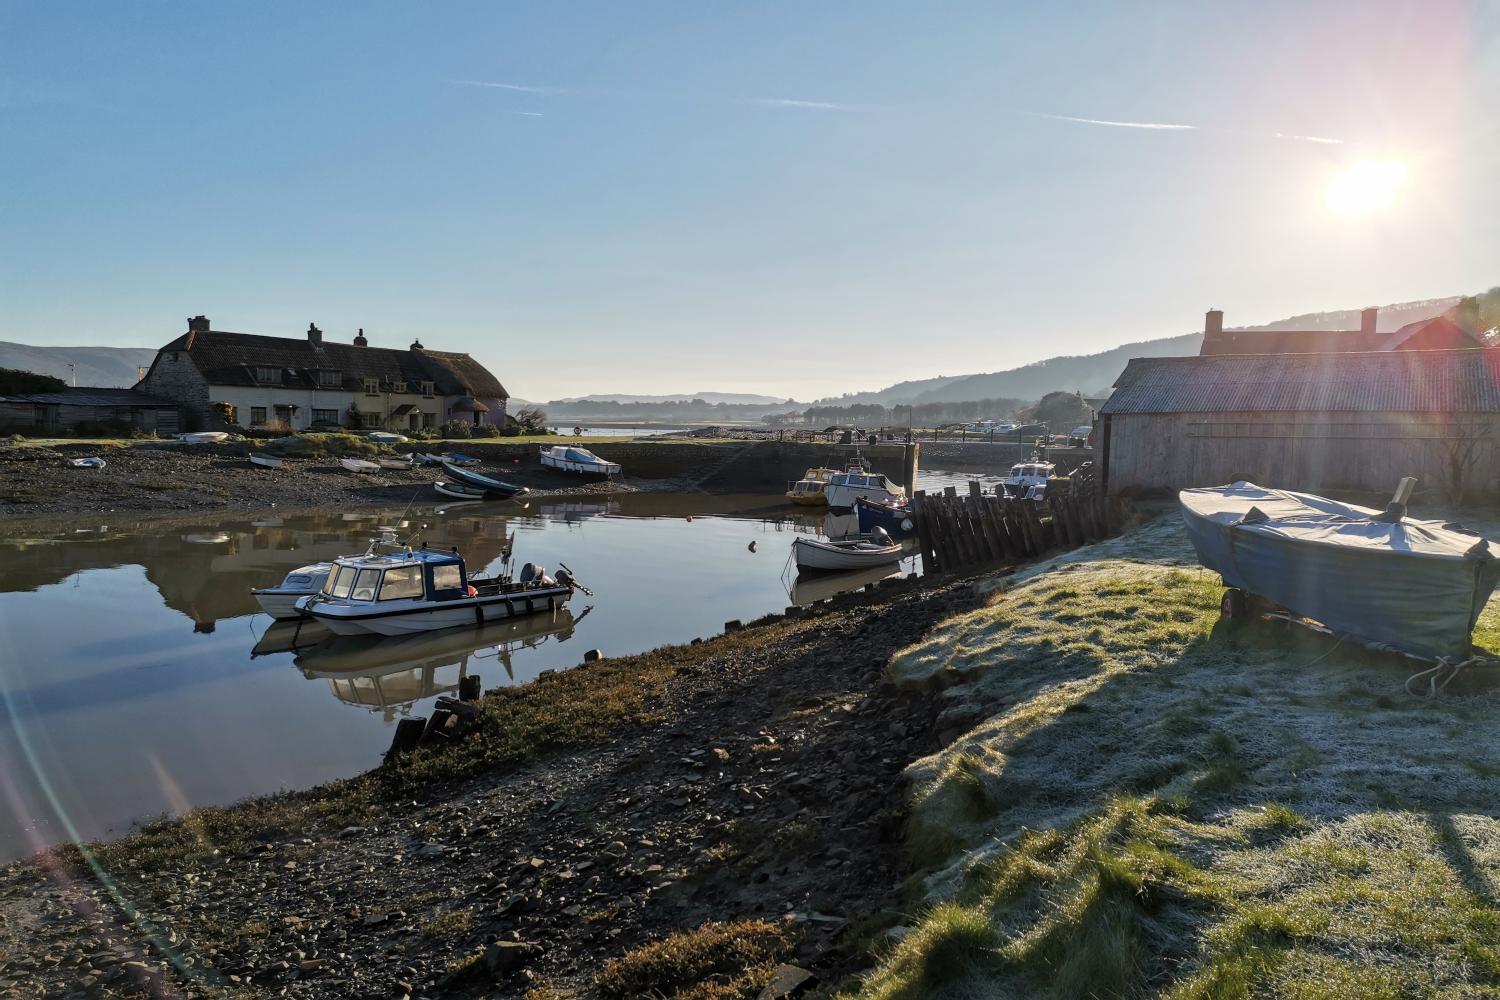 A frosty morning at Porlock Weir Harbour.